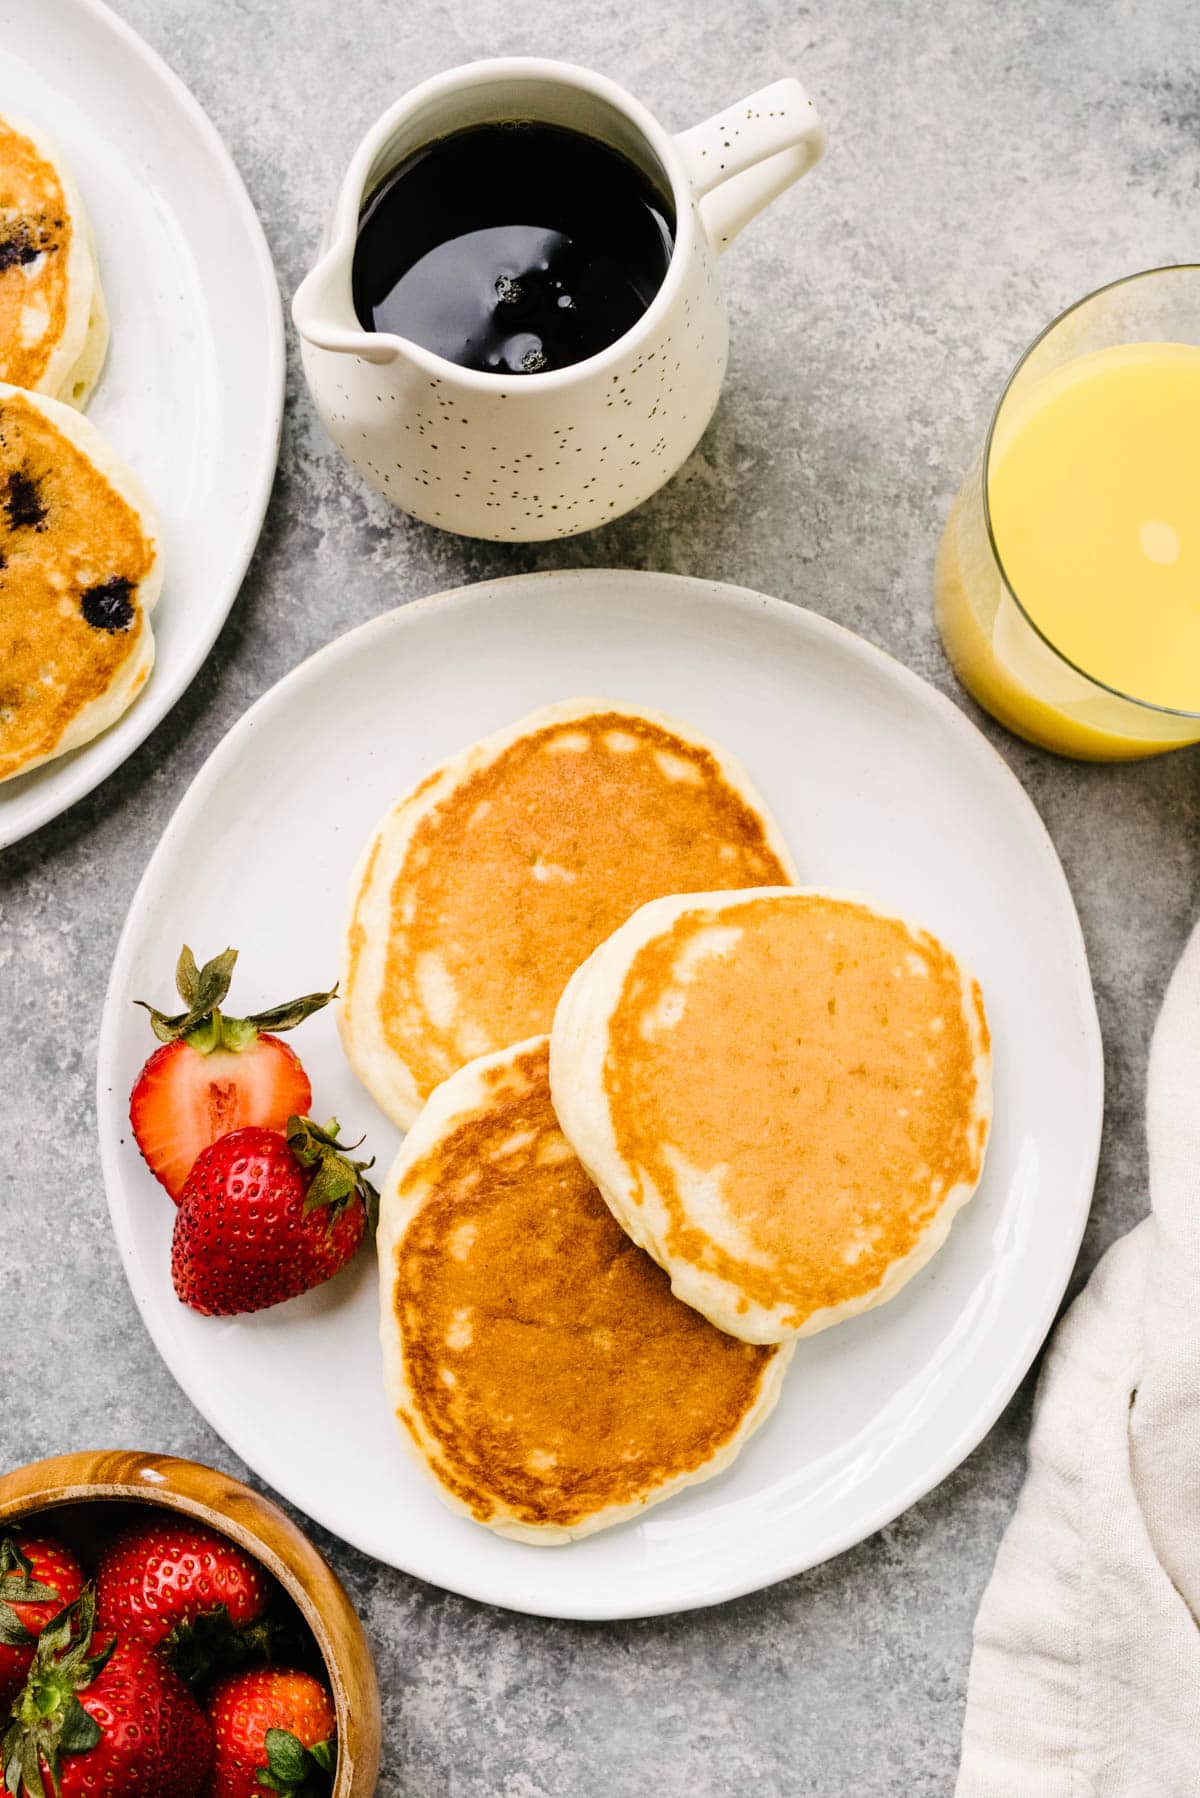 Three homemade pancakes on a white plate with strawberries; a small pitcher of maple syrup, glass of orange juice, bowl of strawberries, and cream linen napkin surround the plate.